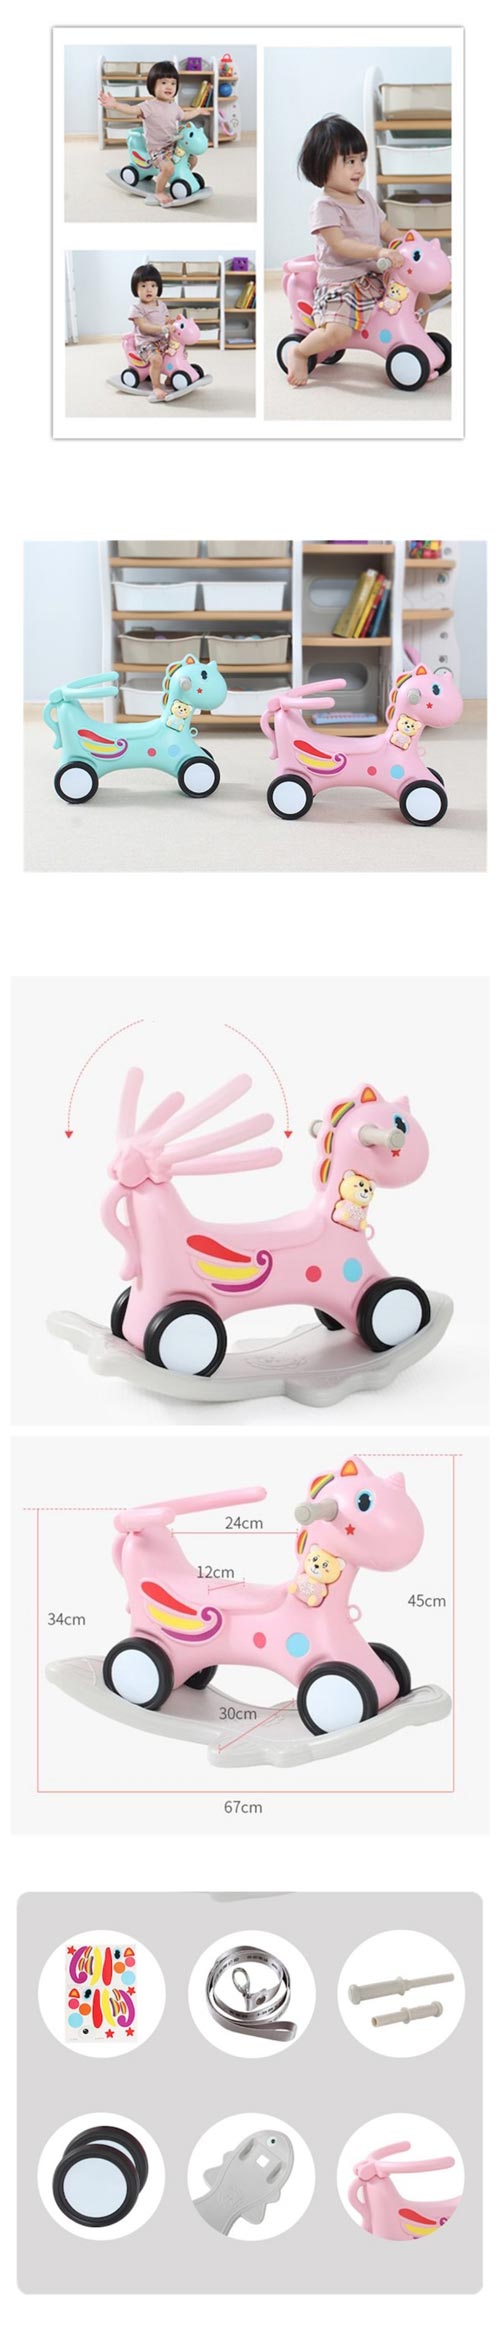 2 In 1 Unicorn Rocking Horse For Baby